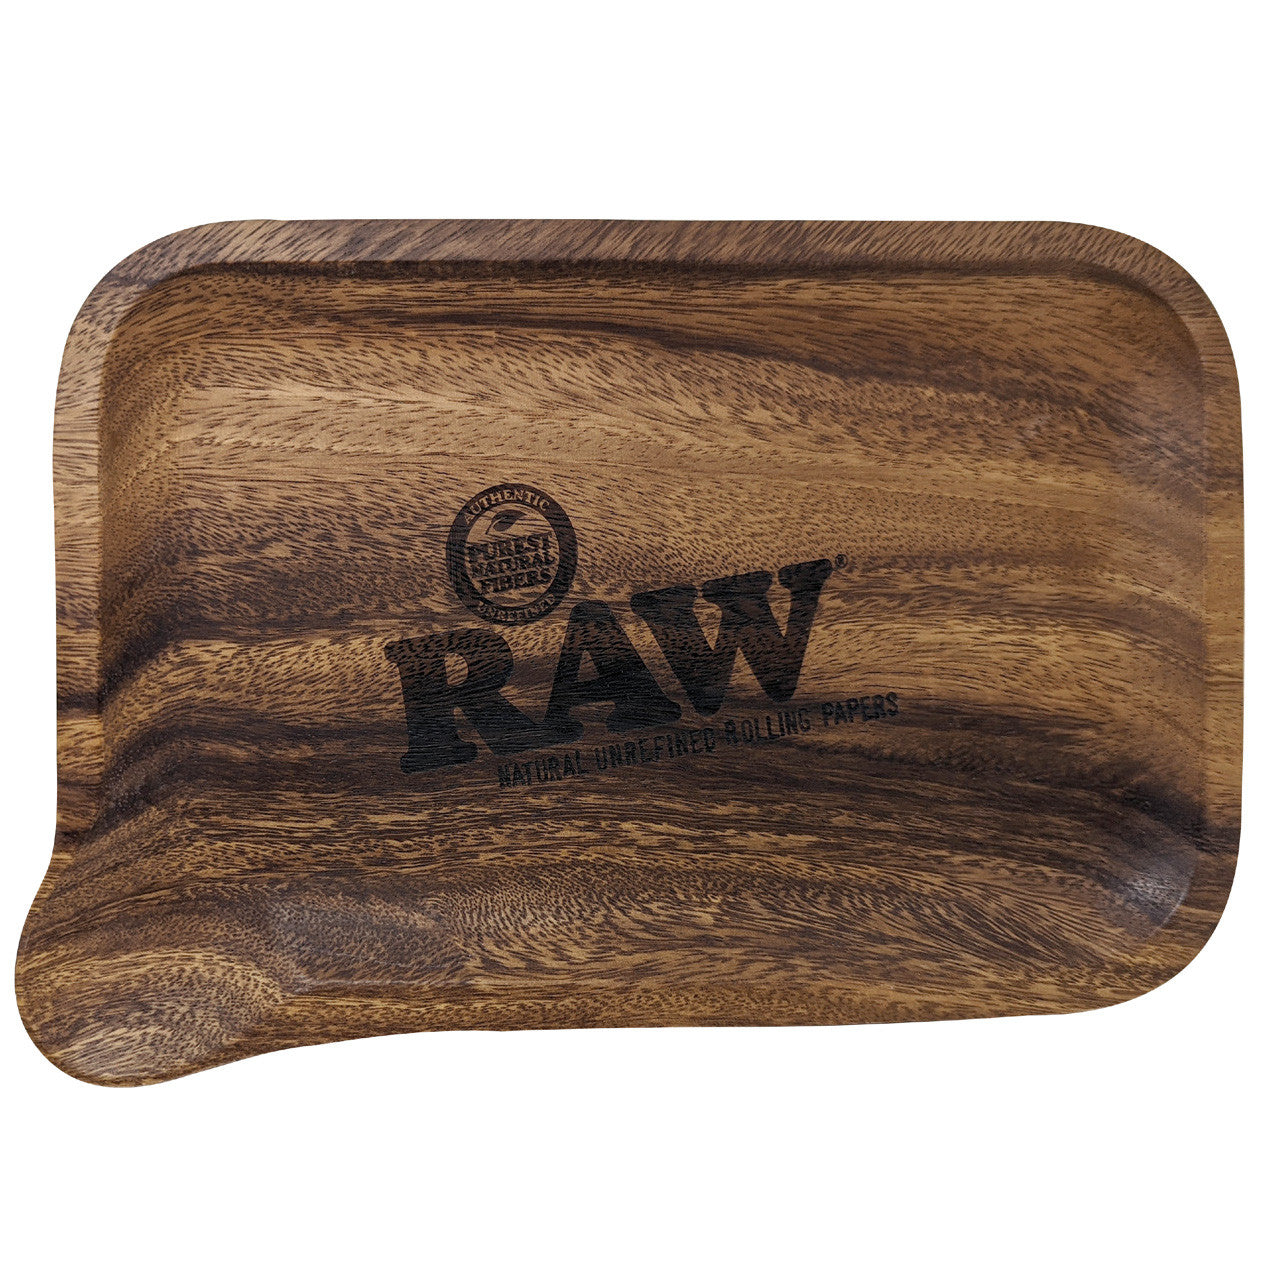 RAW® - Wooden Rolling Tray with Pour Spout